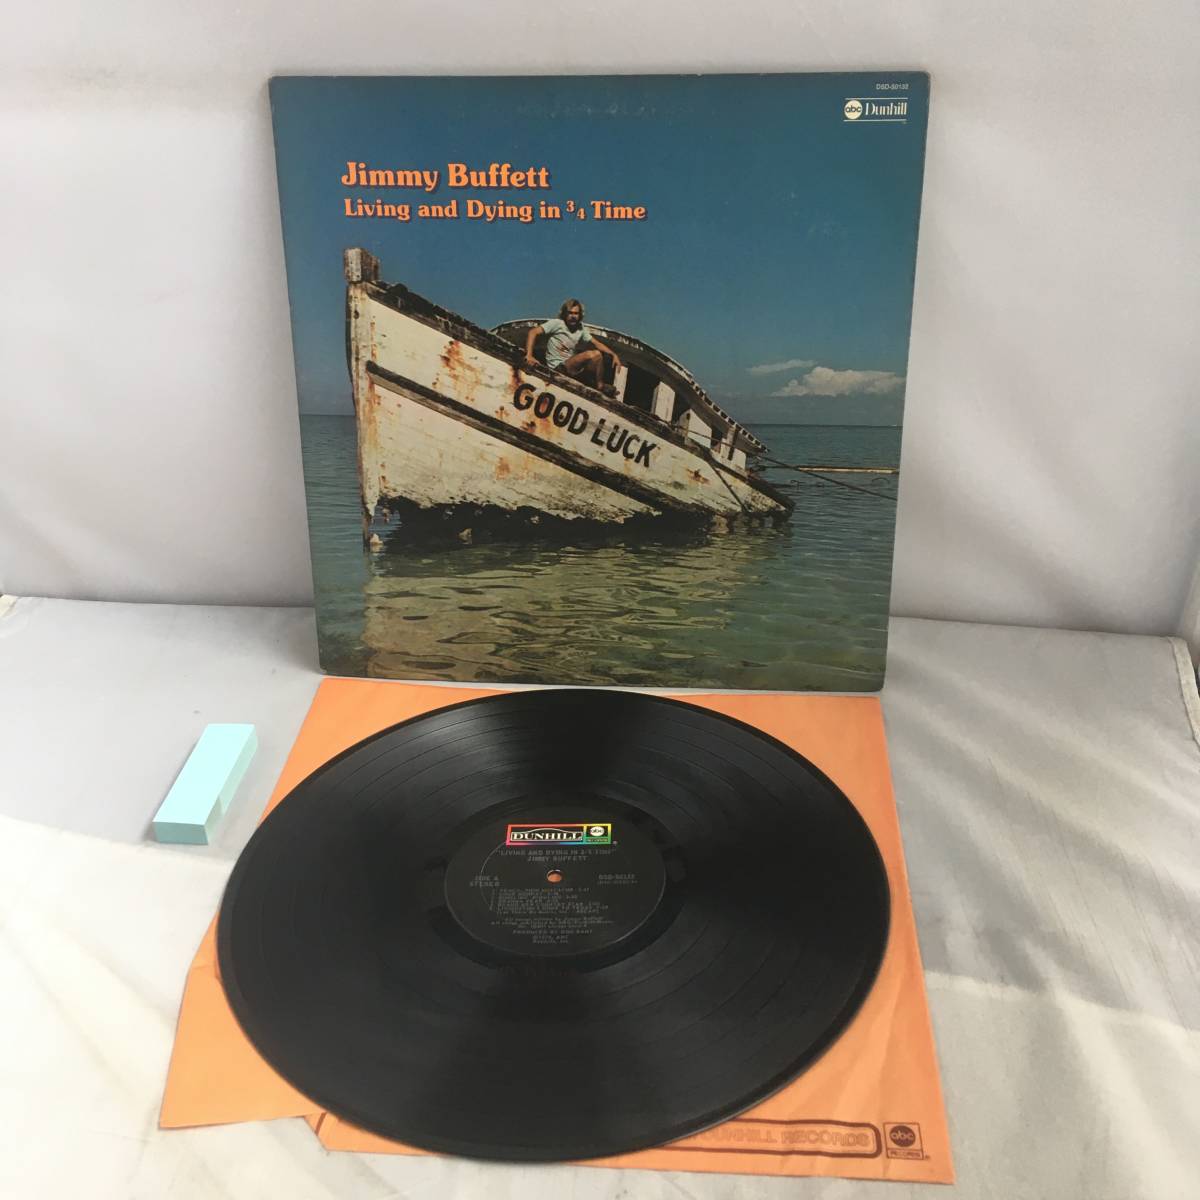 w2054【レコード　Jimmy Buffett / Living And Dying In 3/4 Time　DSD-50132】_画像1